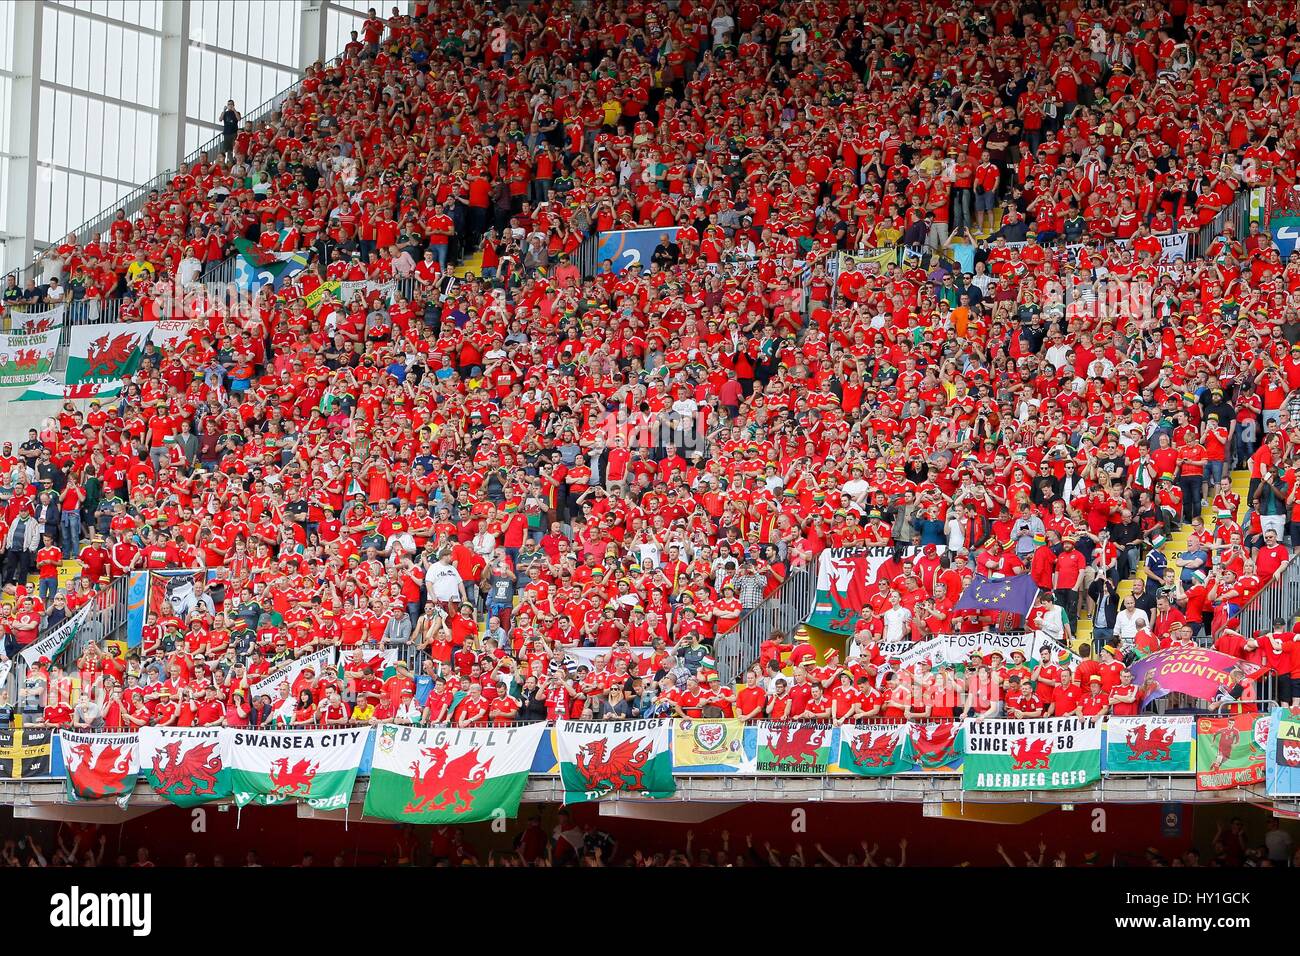 WALES FANS IN THE STADIUM ENGLAND V WALES STADE FELIX BOLLAERT-DELELIS LENS FRANCE 16 June 2016 Stock Photo